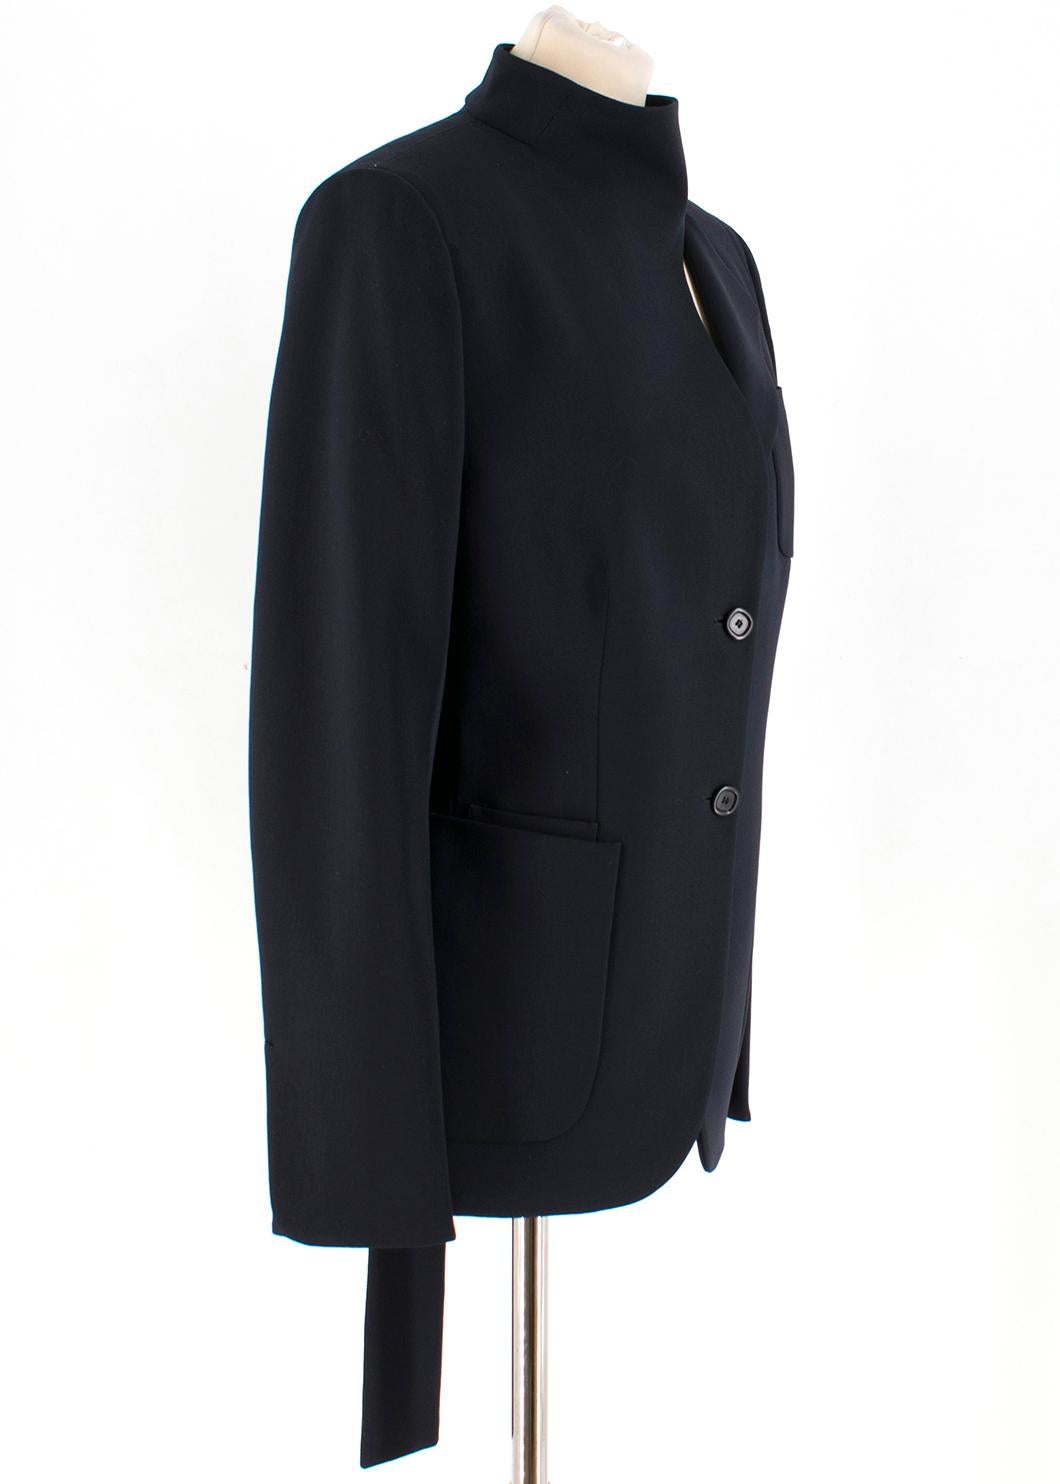 Agnona Navy Wool-blend Blazer

- Navy, mid-weight, wool-blend blazer
- Scarf effect 
- Single-breasted two-buttons fastening
- Breast pocket
- Front ticket pockets
- Two internal pockets
- Padded shoulders
- Slim fit
- 60% wool and 40% viscose.